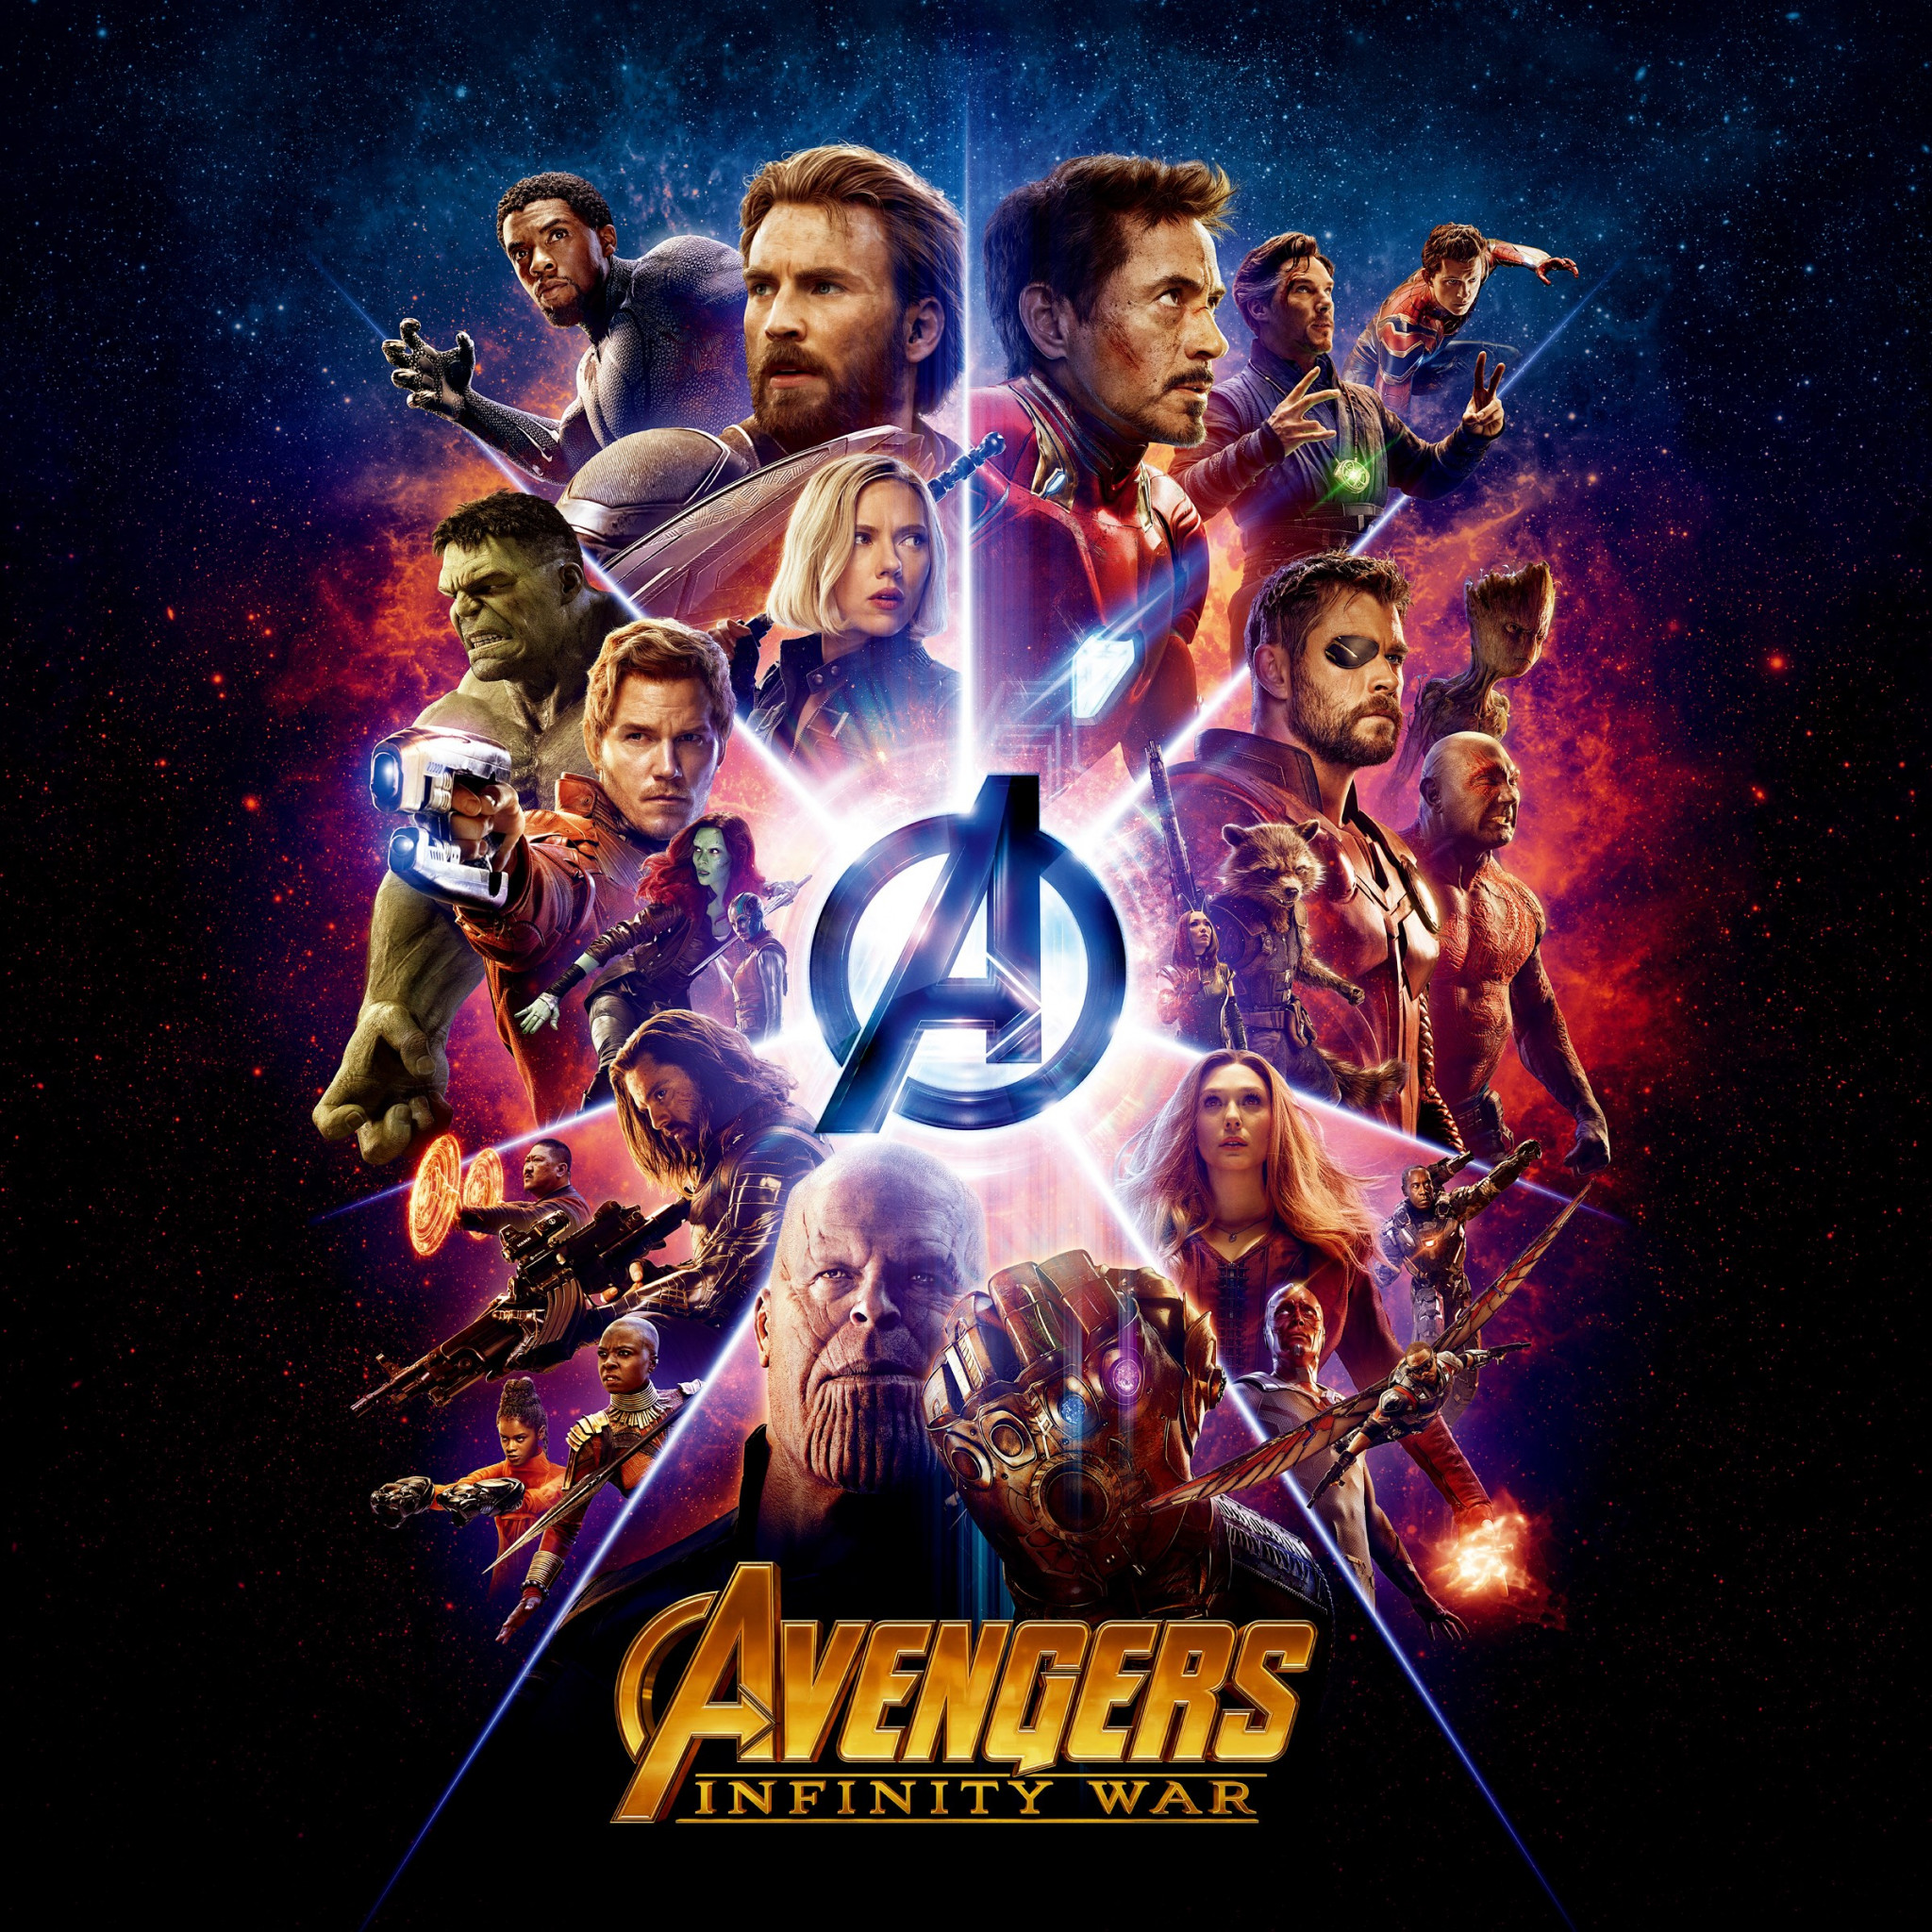 All the heroes from Avengers: Infinity War wallpaper 2048x2048